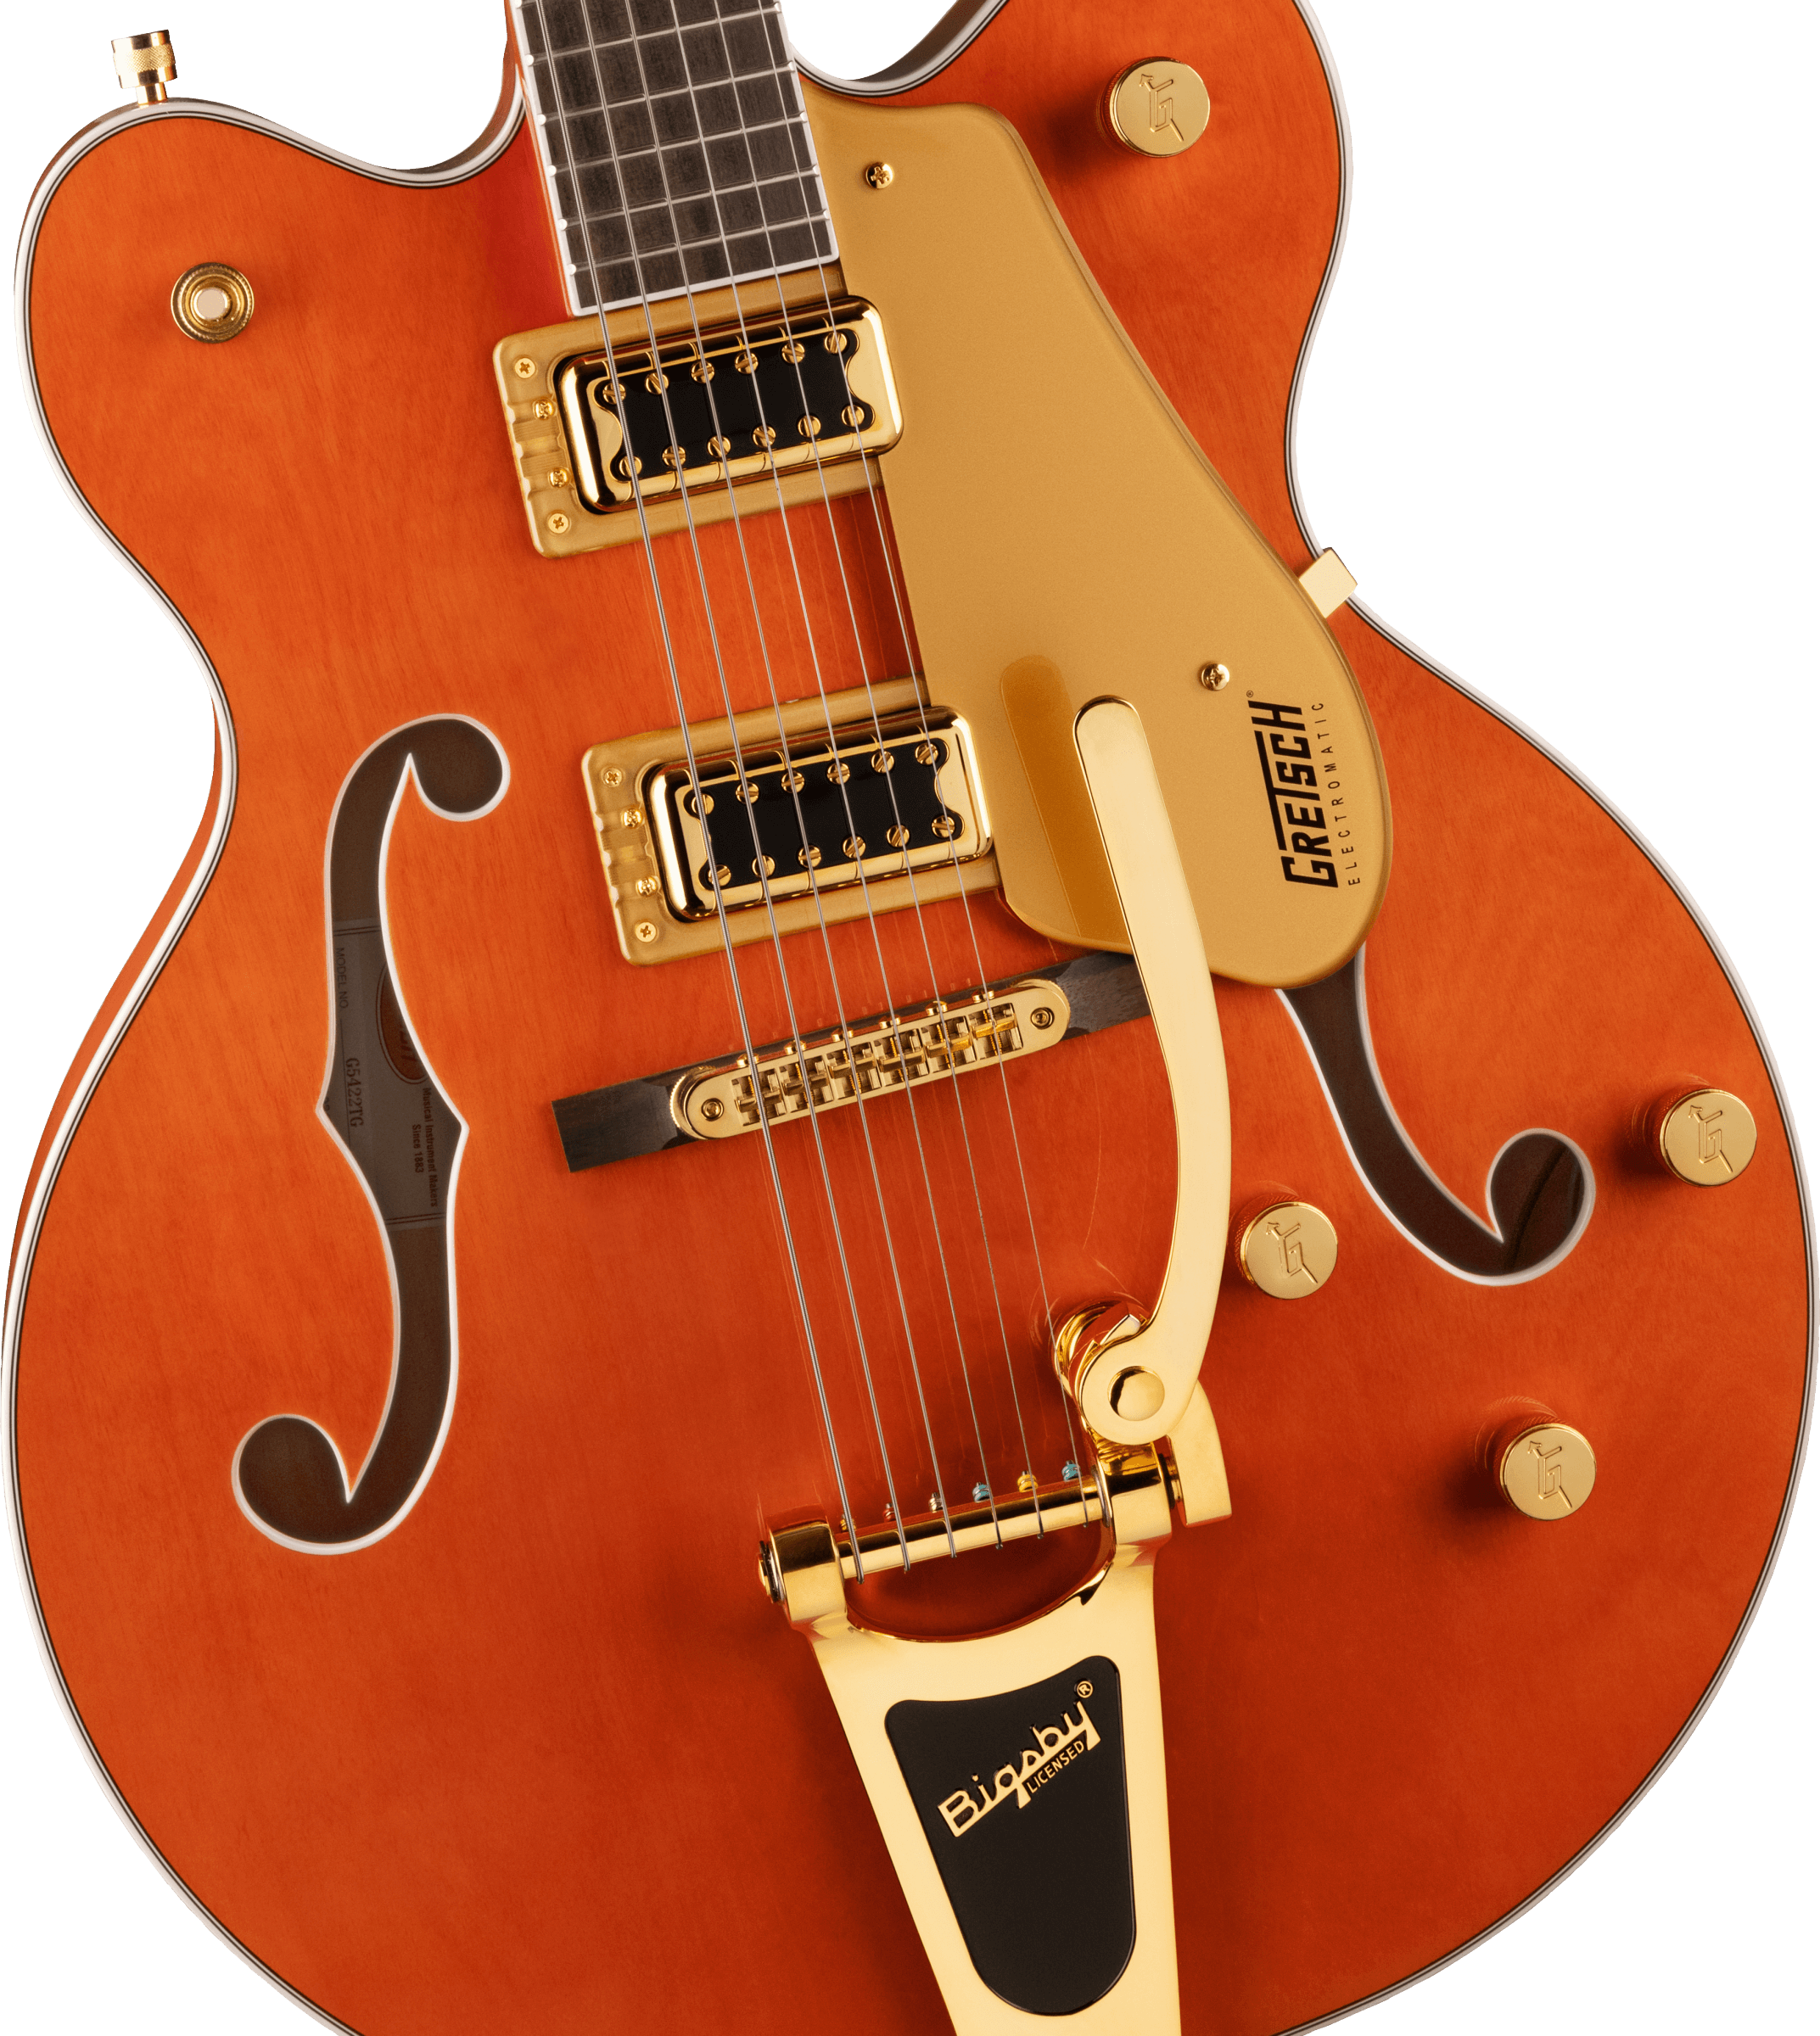 Gretsch G5422TG Electromatic Classic Hollowbody Double Cut Electric Guitar - Orange Stain